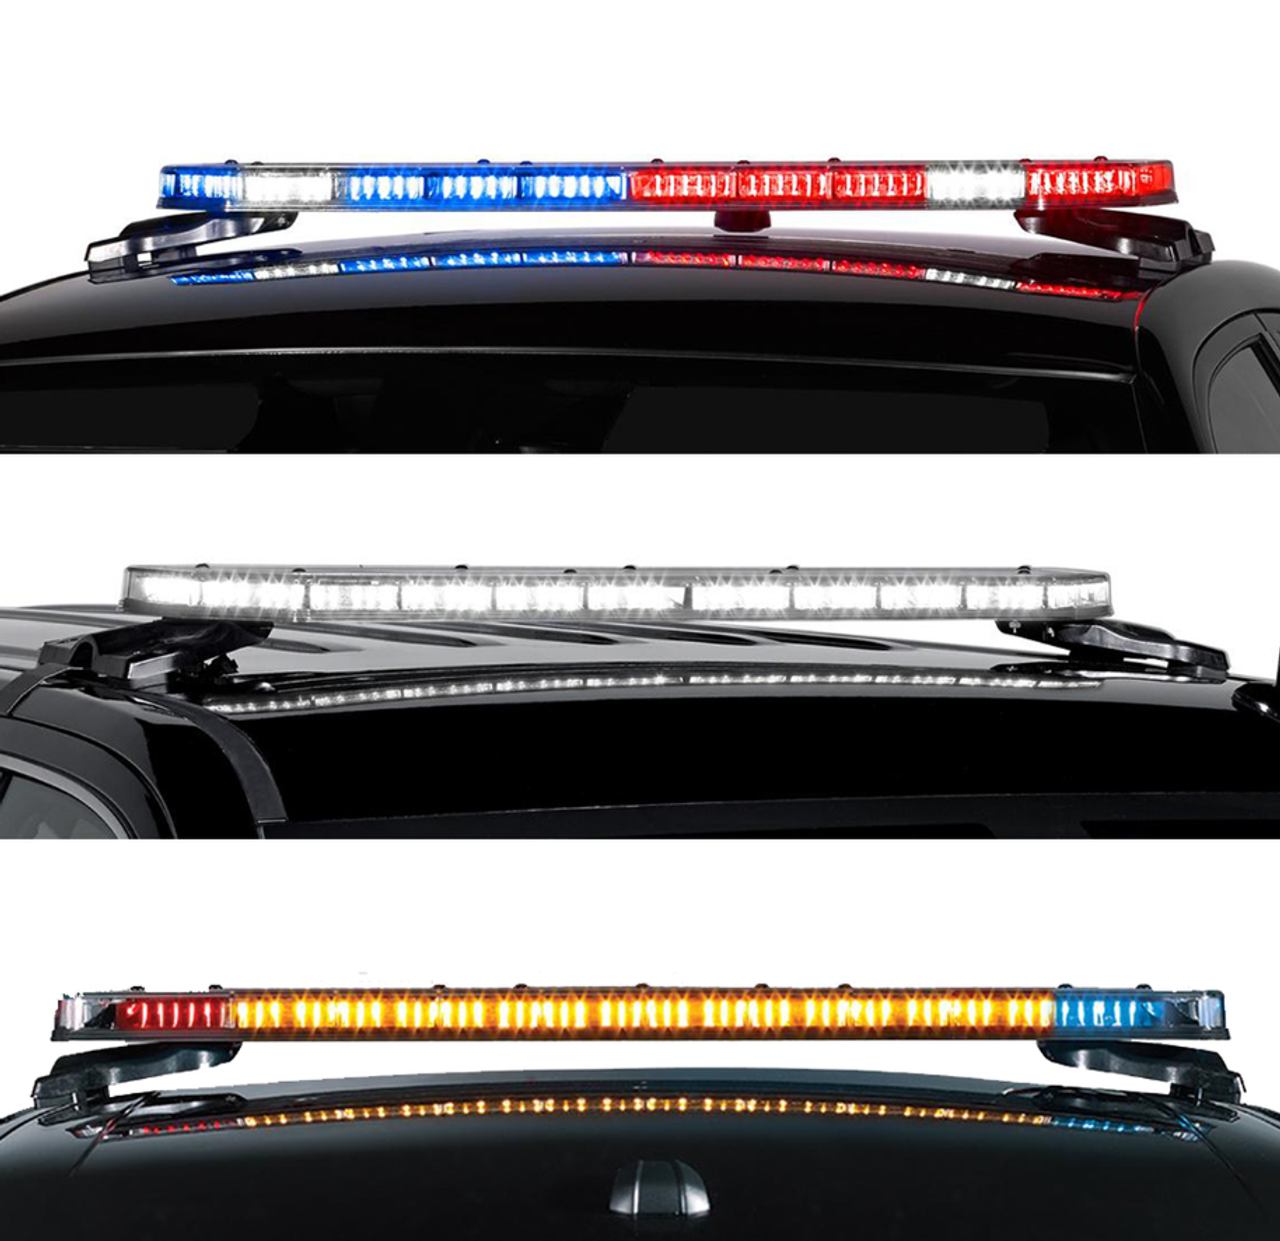 Federal Signal Integrity LED Light Bar, Dual Color, Red/White Front, Red/Amber Rear, Includes Full Flood Scene Lighting and Amber Traffic Advisor, 51 inches